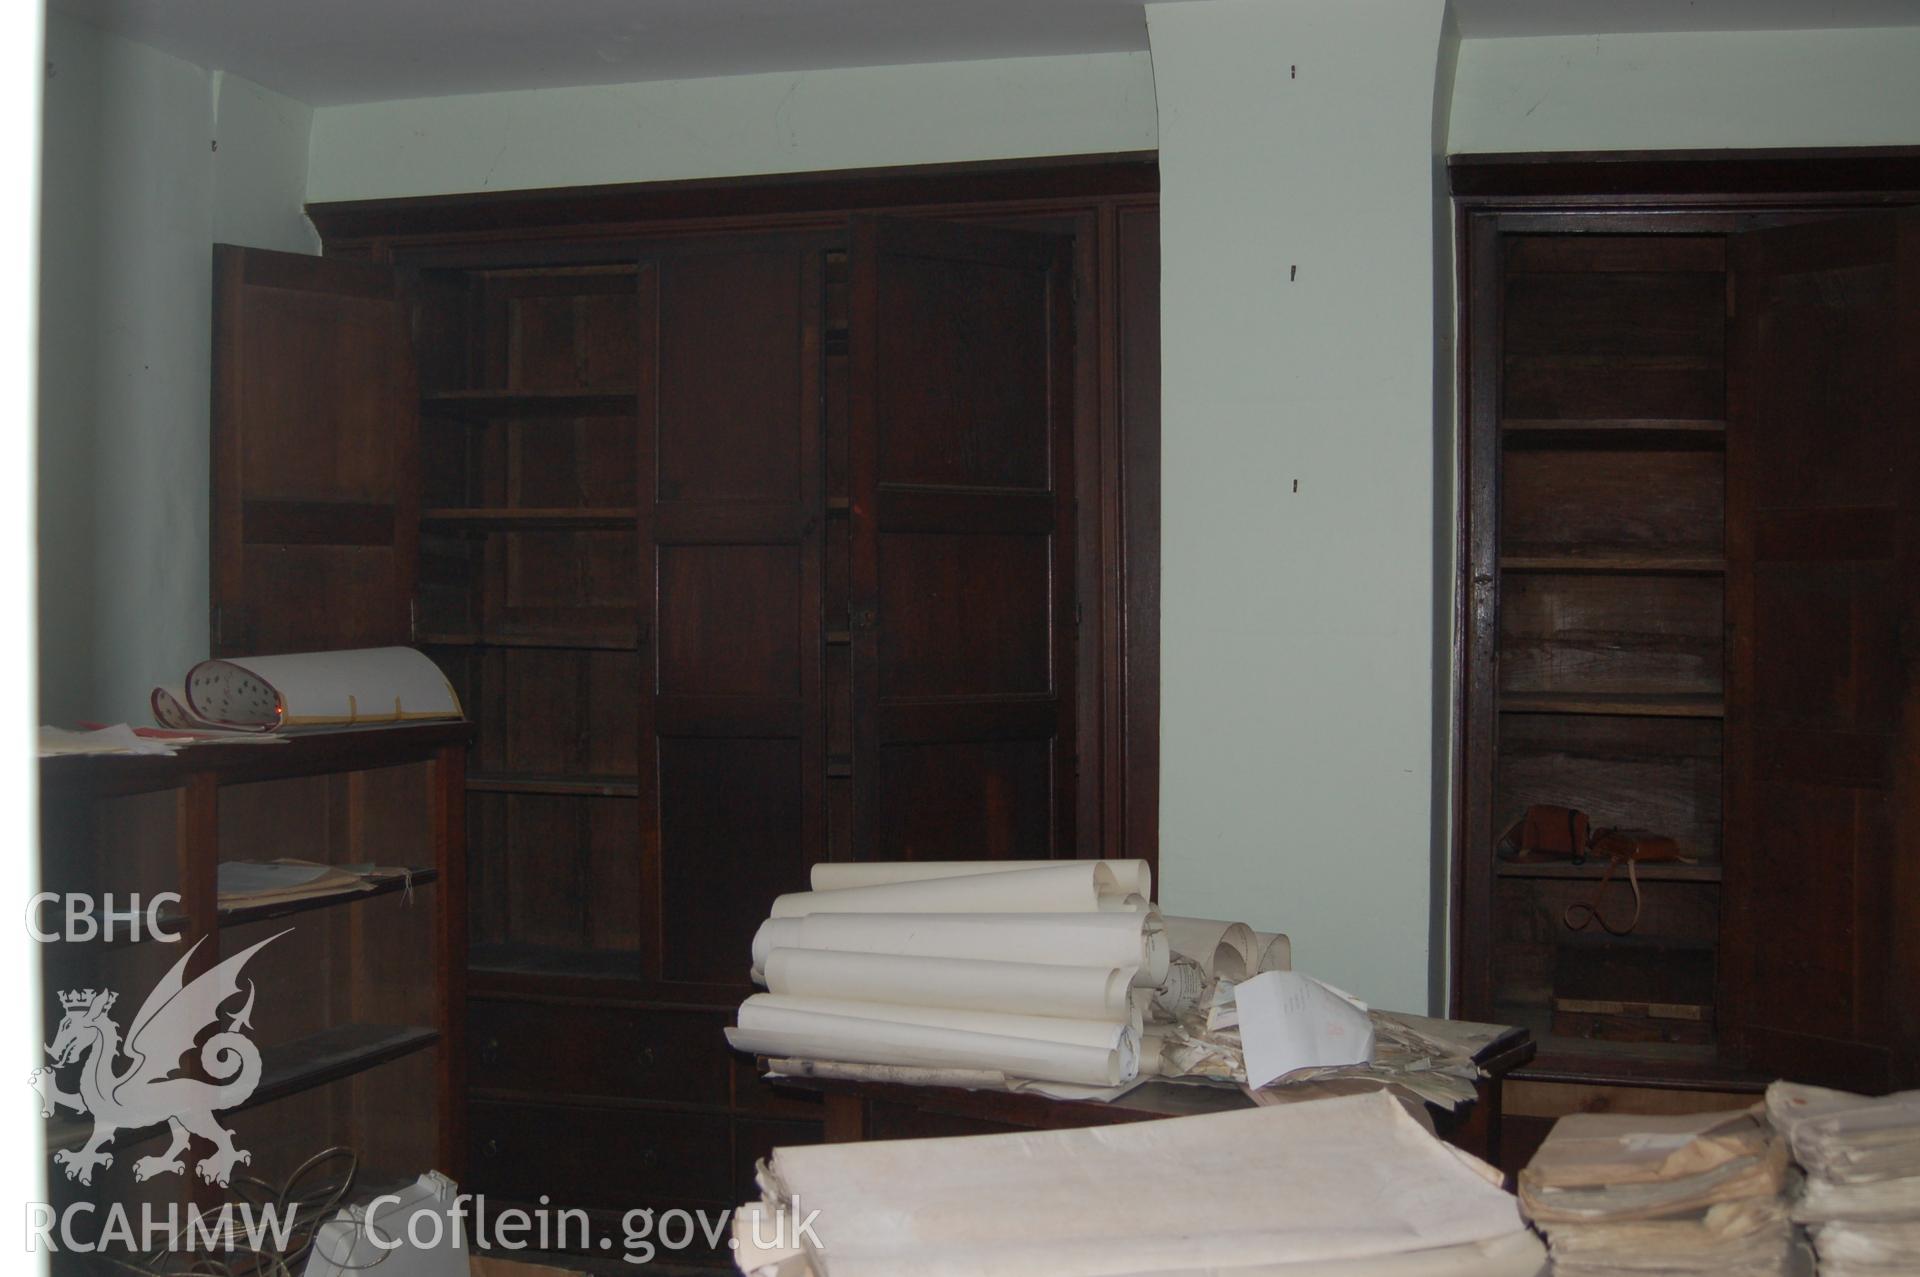 Digital colour photograph showing Iscoyd Park (interior, wooden cupboards),  received in the course of Emergency Recording case ref no RCS2/1/2257.